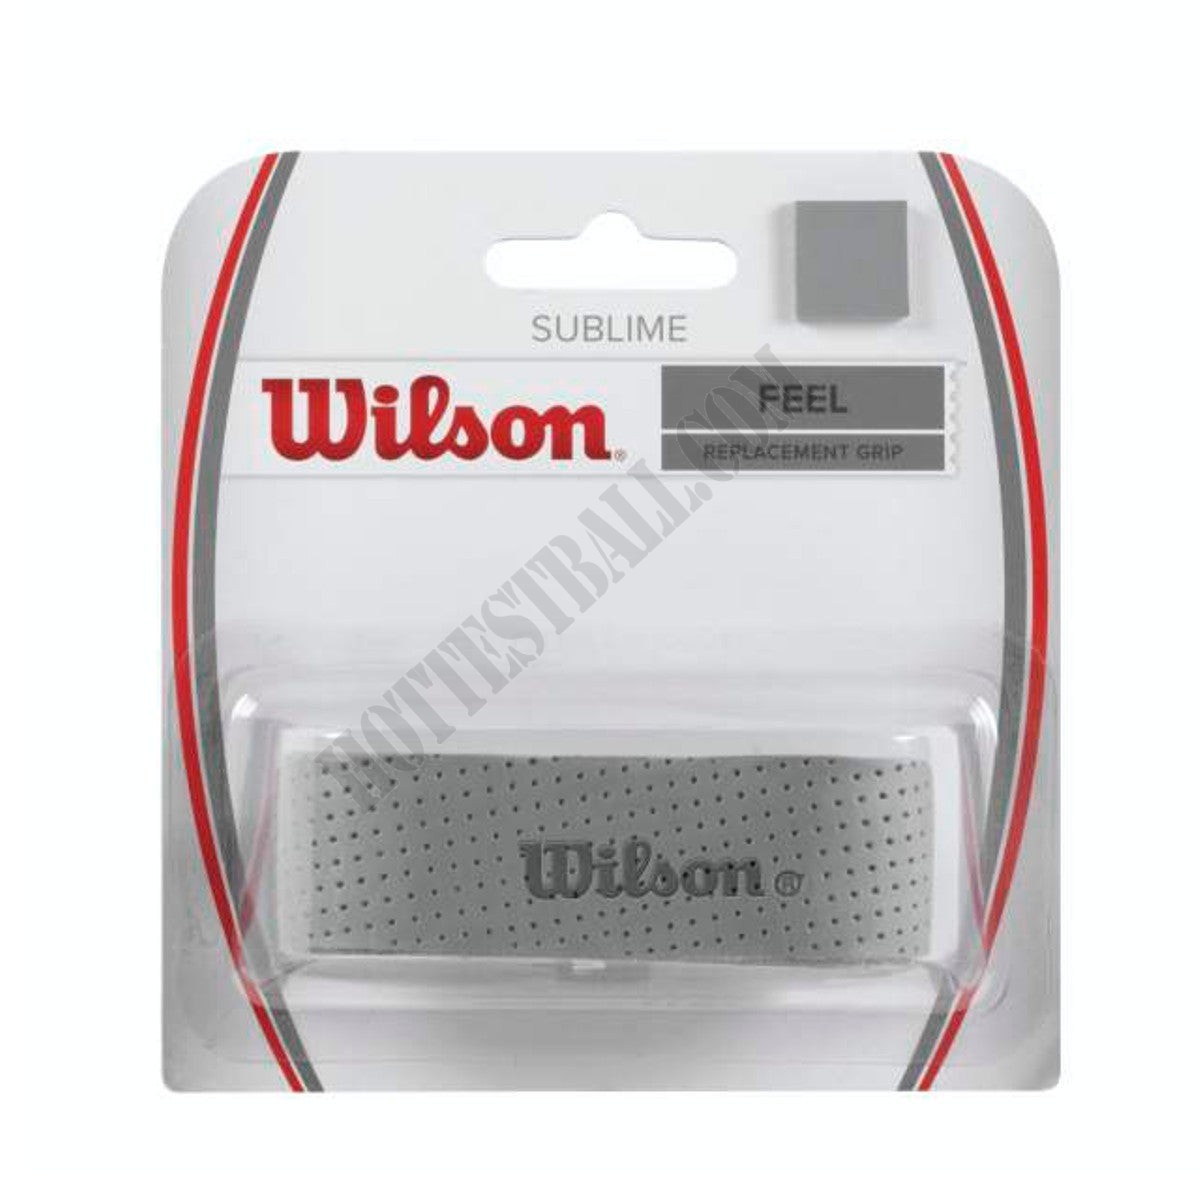 Sublime Replacement Grip - Wilson Discount Store - -6